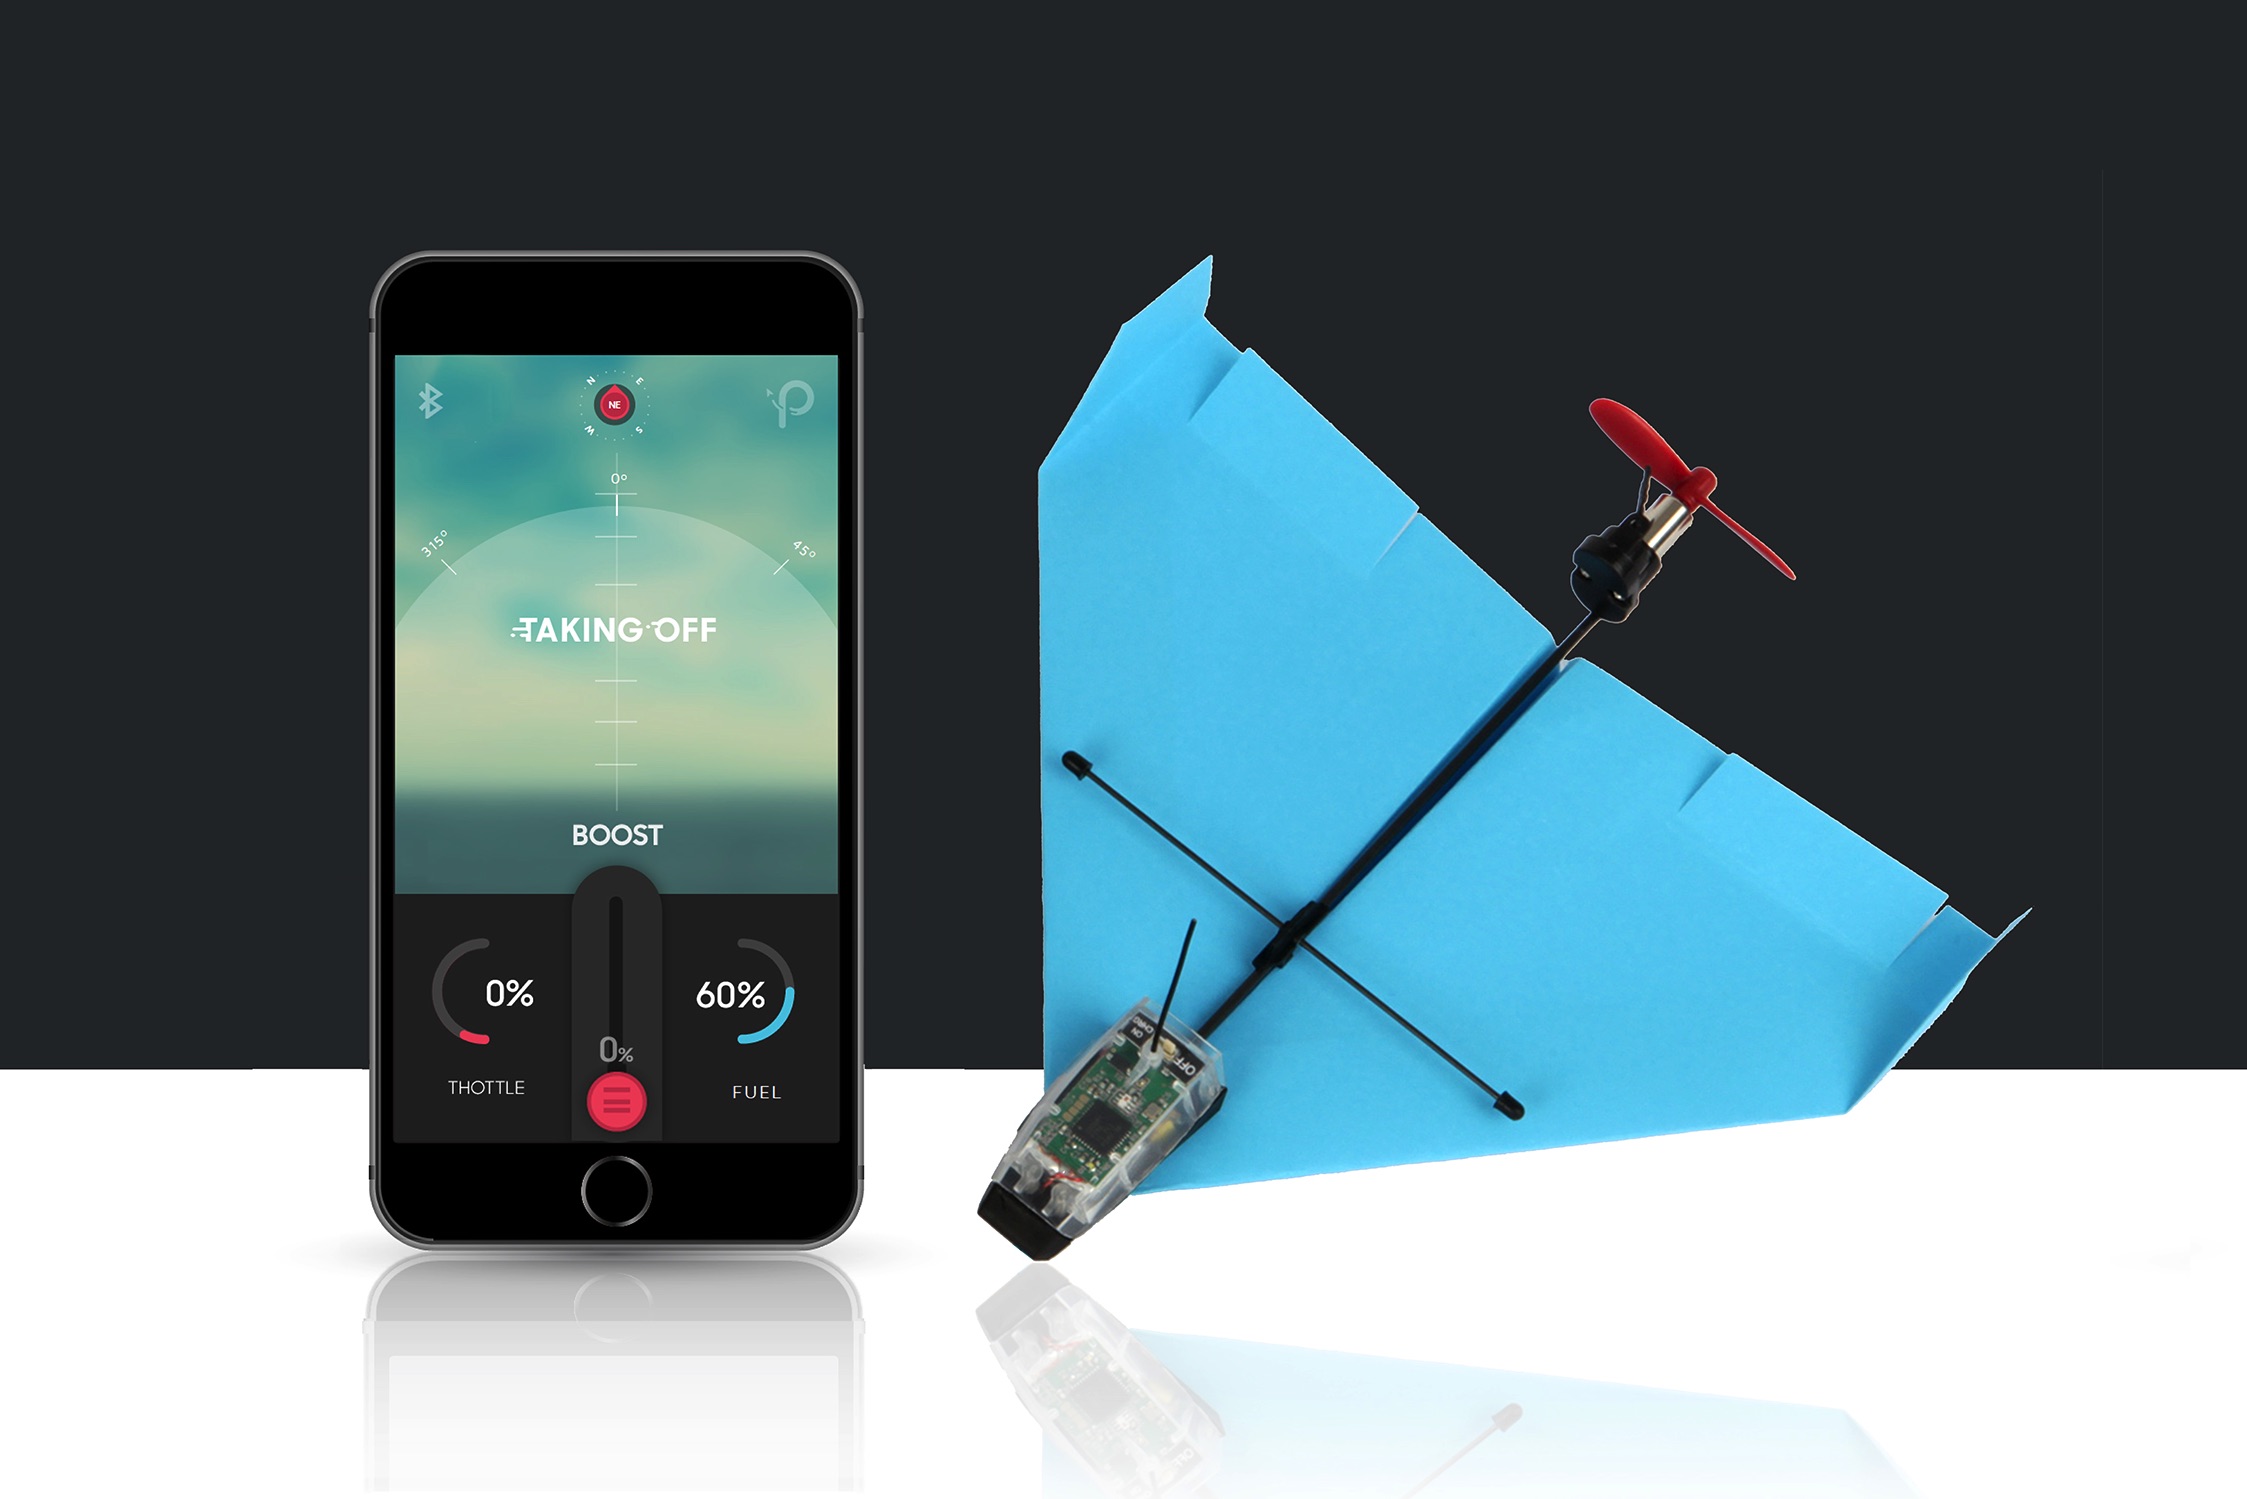 PowerUp 4.0 Smartphone Controlled Paper Airplane Kit